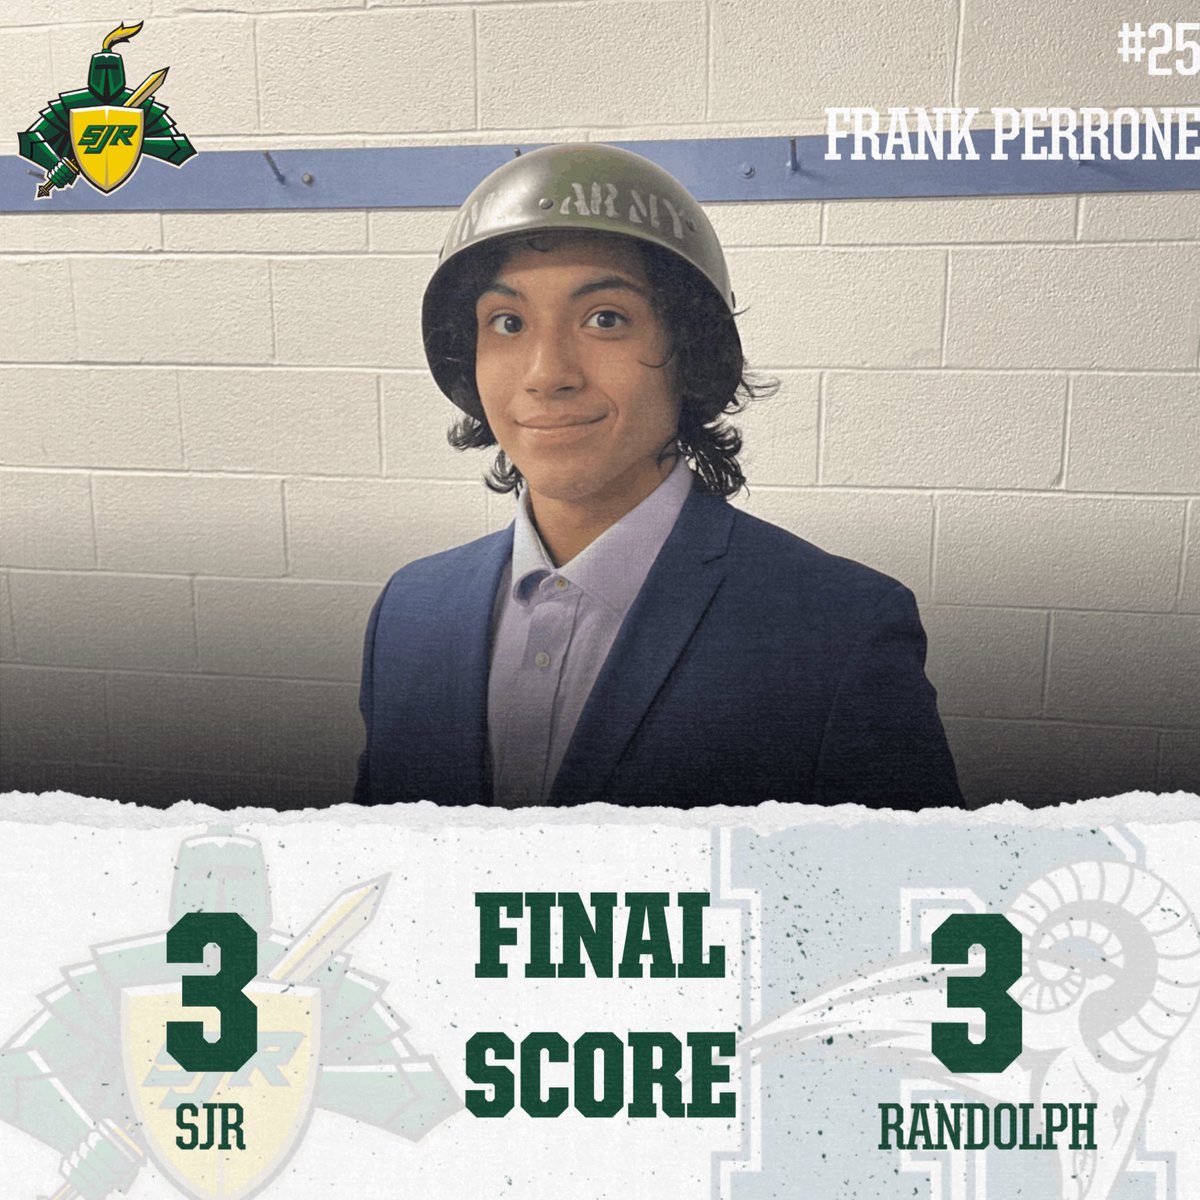 The Green Knights close out 2022 with a tie against #11 Randolph.

🚨: Kondratowicz, Perrone, Hughes

🍏: Coiro, Mangarelli (2), R. Beanland, Albano

🥅: Monte: 37 saves

Next game is Wednesday against #14 Seton Hall Pre.

#WeAreSJR🔰